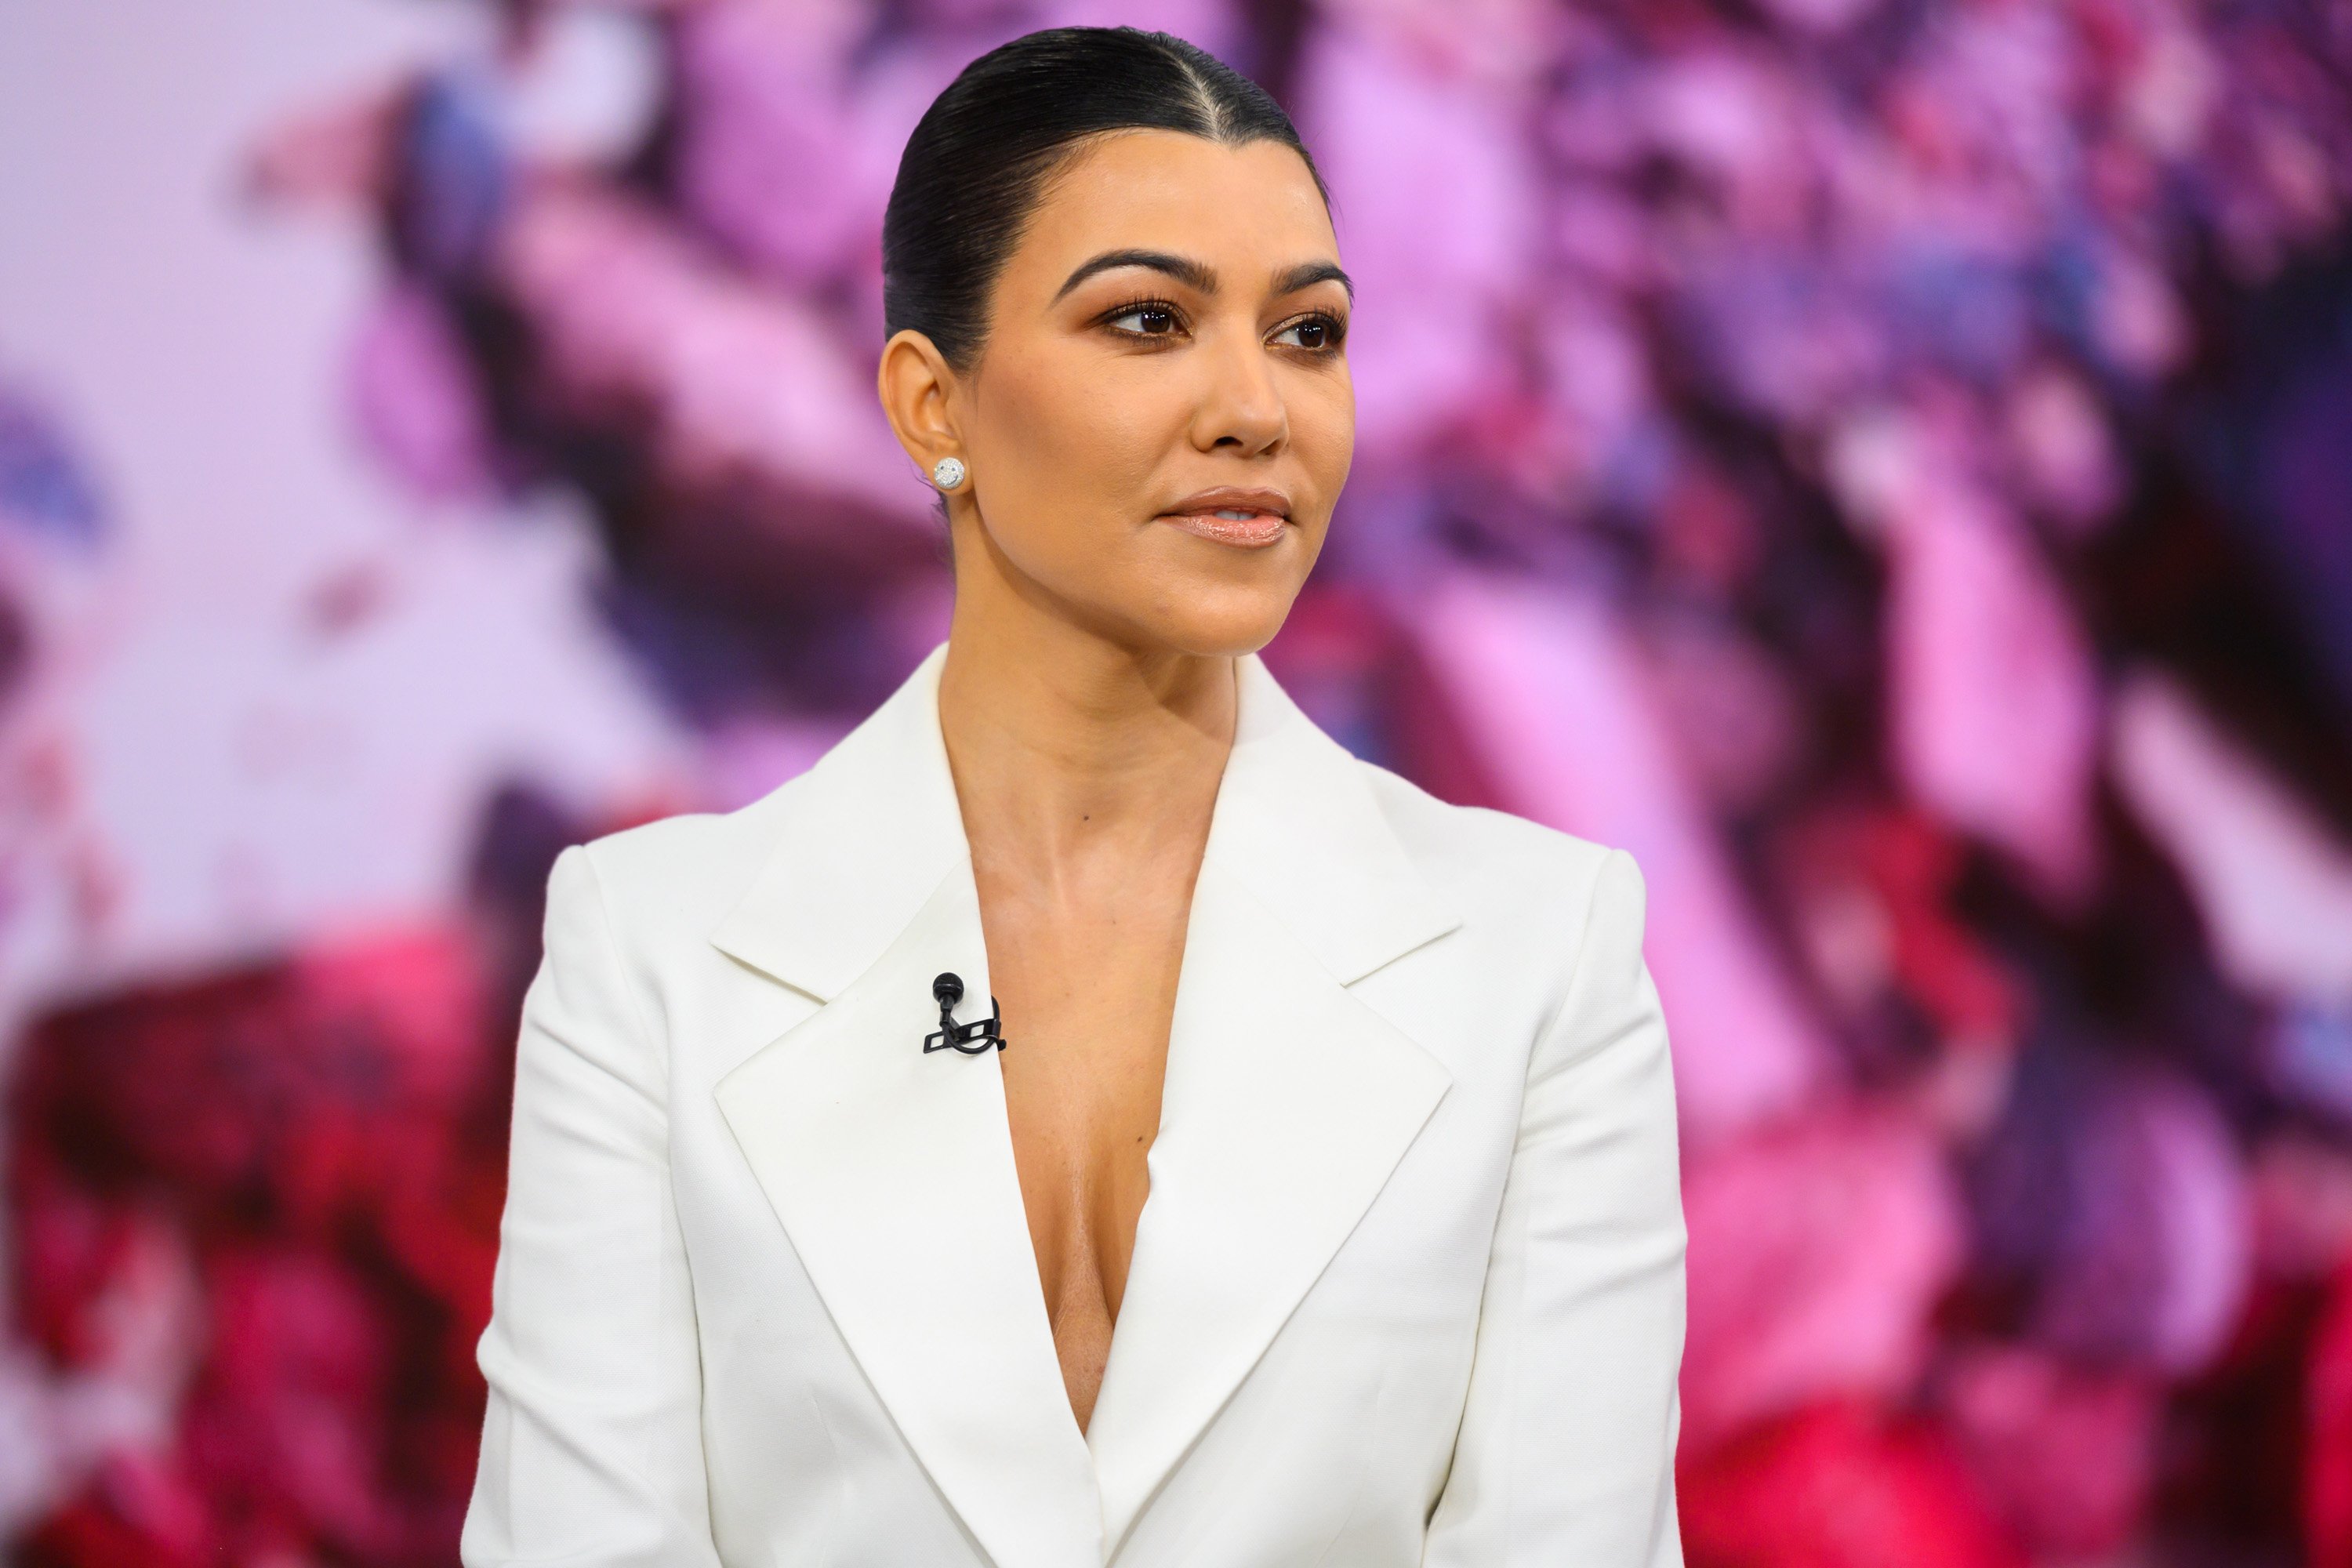 Kourtney Kardashian during her "Today" show appearance on February 7, 2019. | Photo: Getty Images